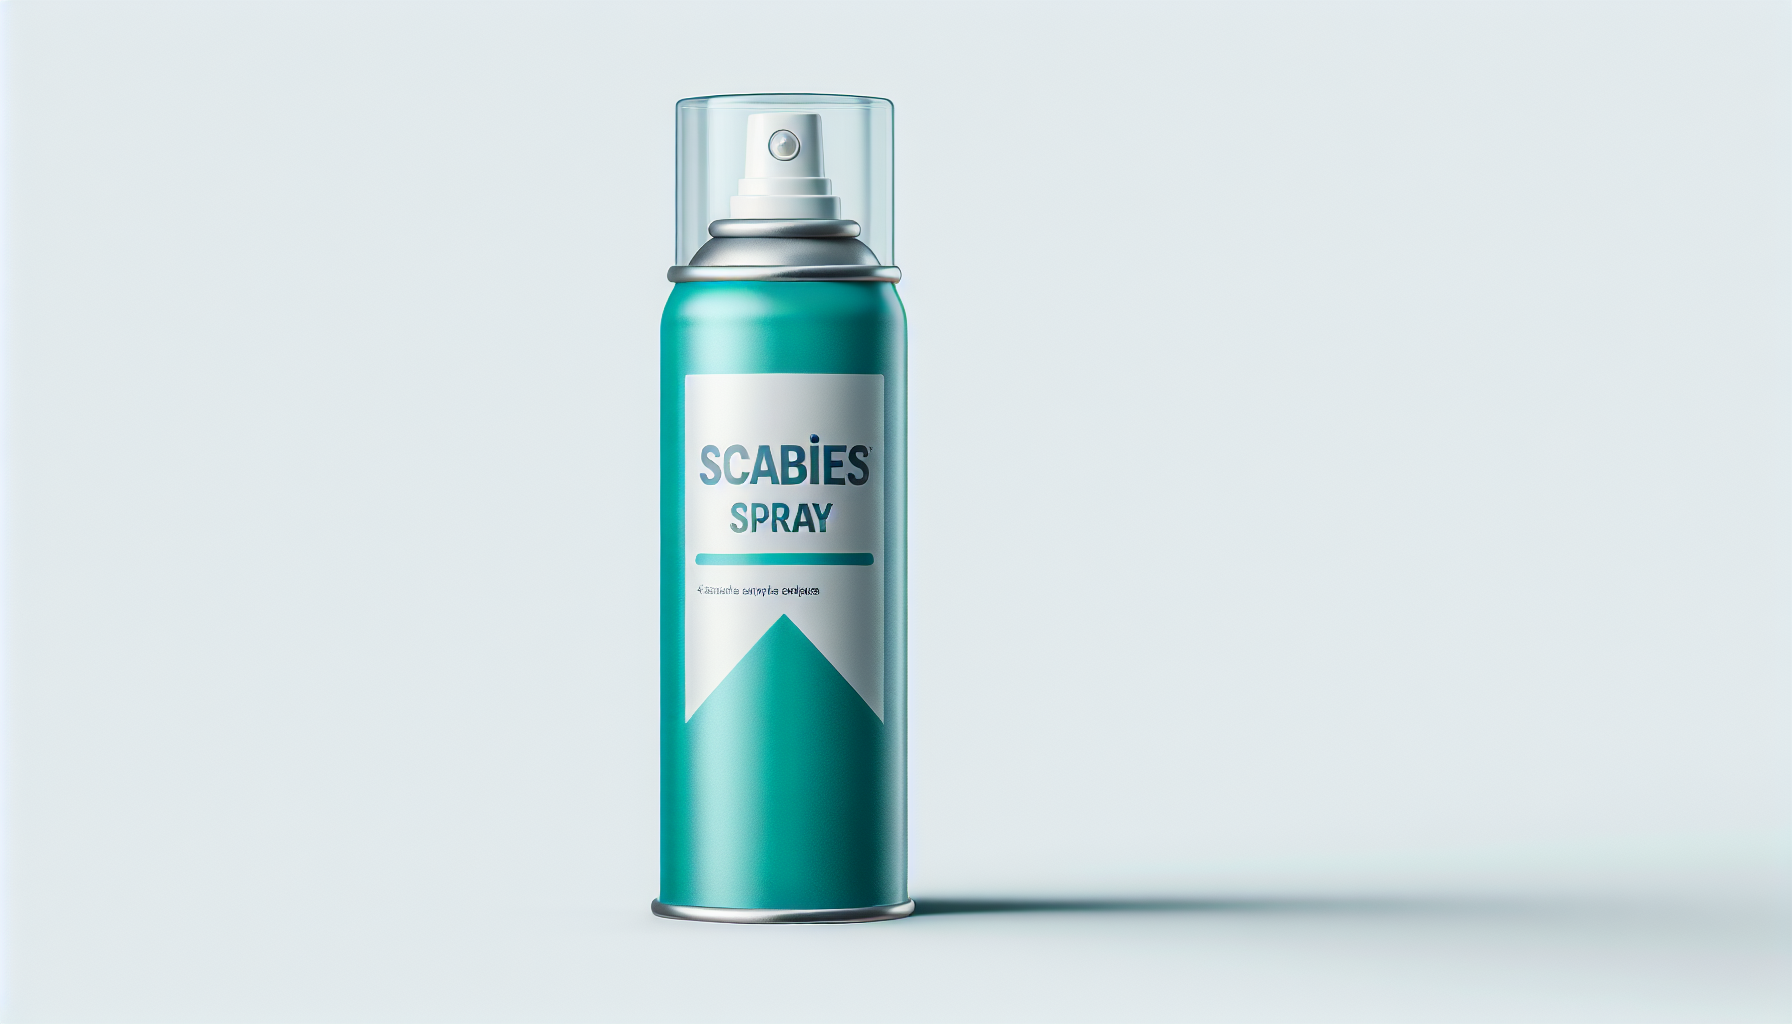 What Is The Best Spray To Kill Scabies On Mattress?